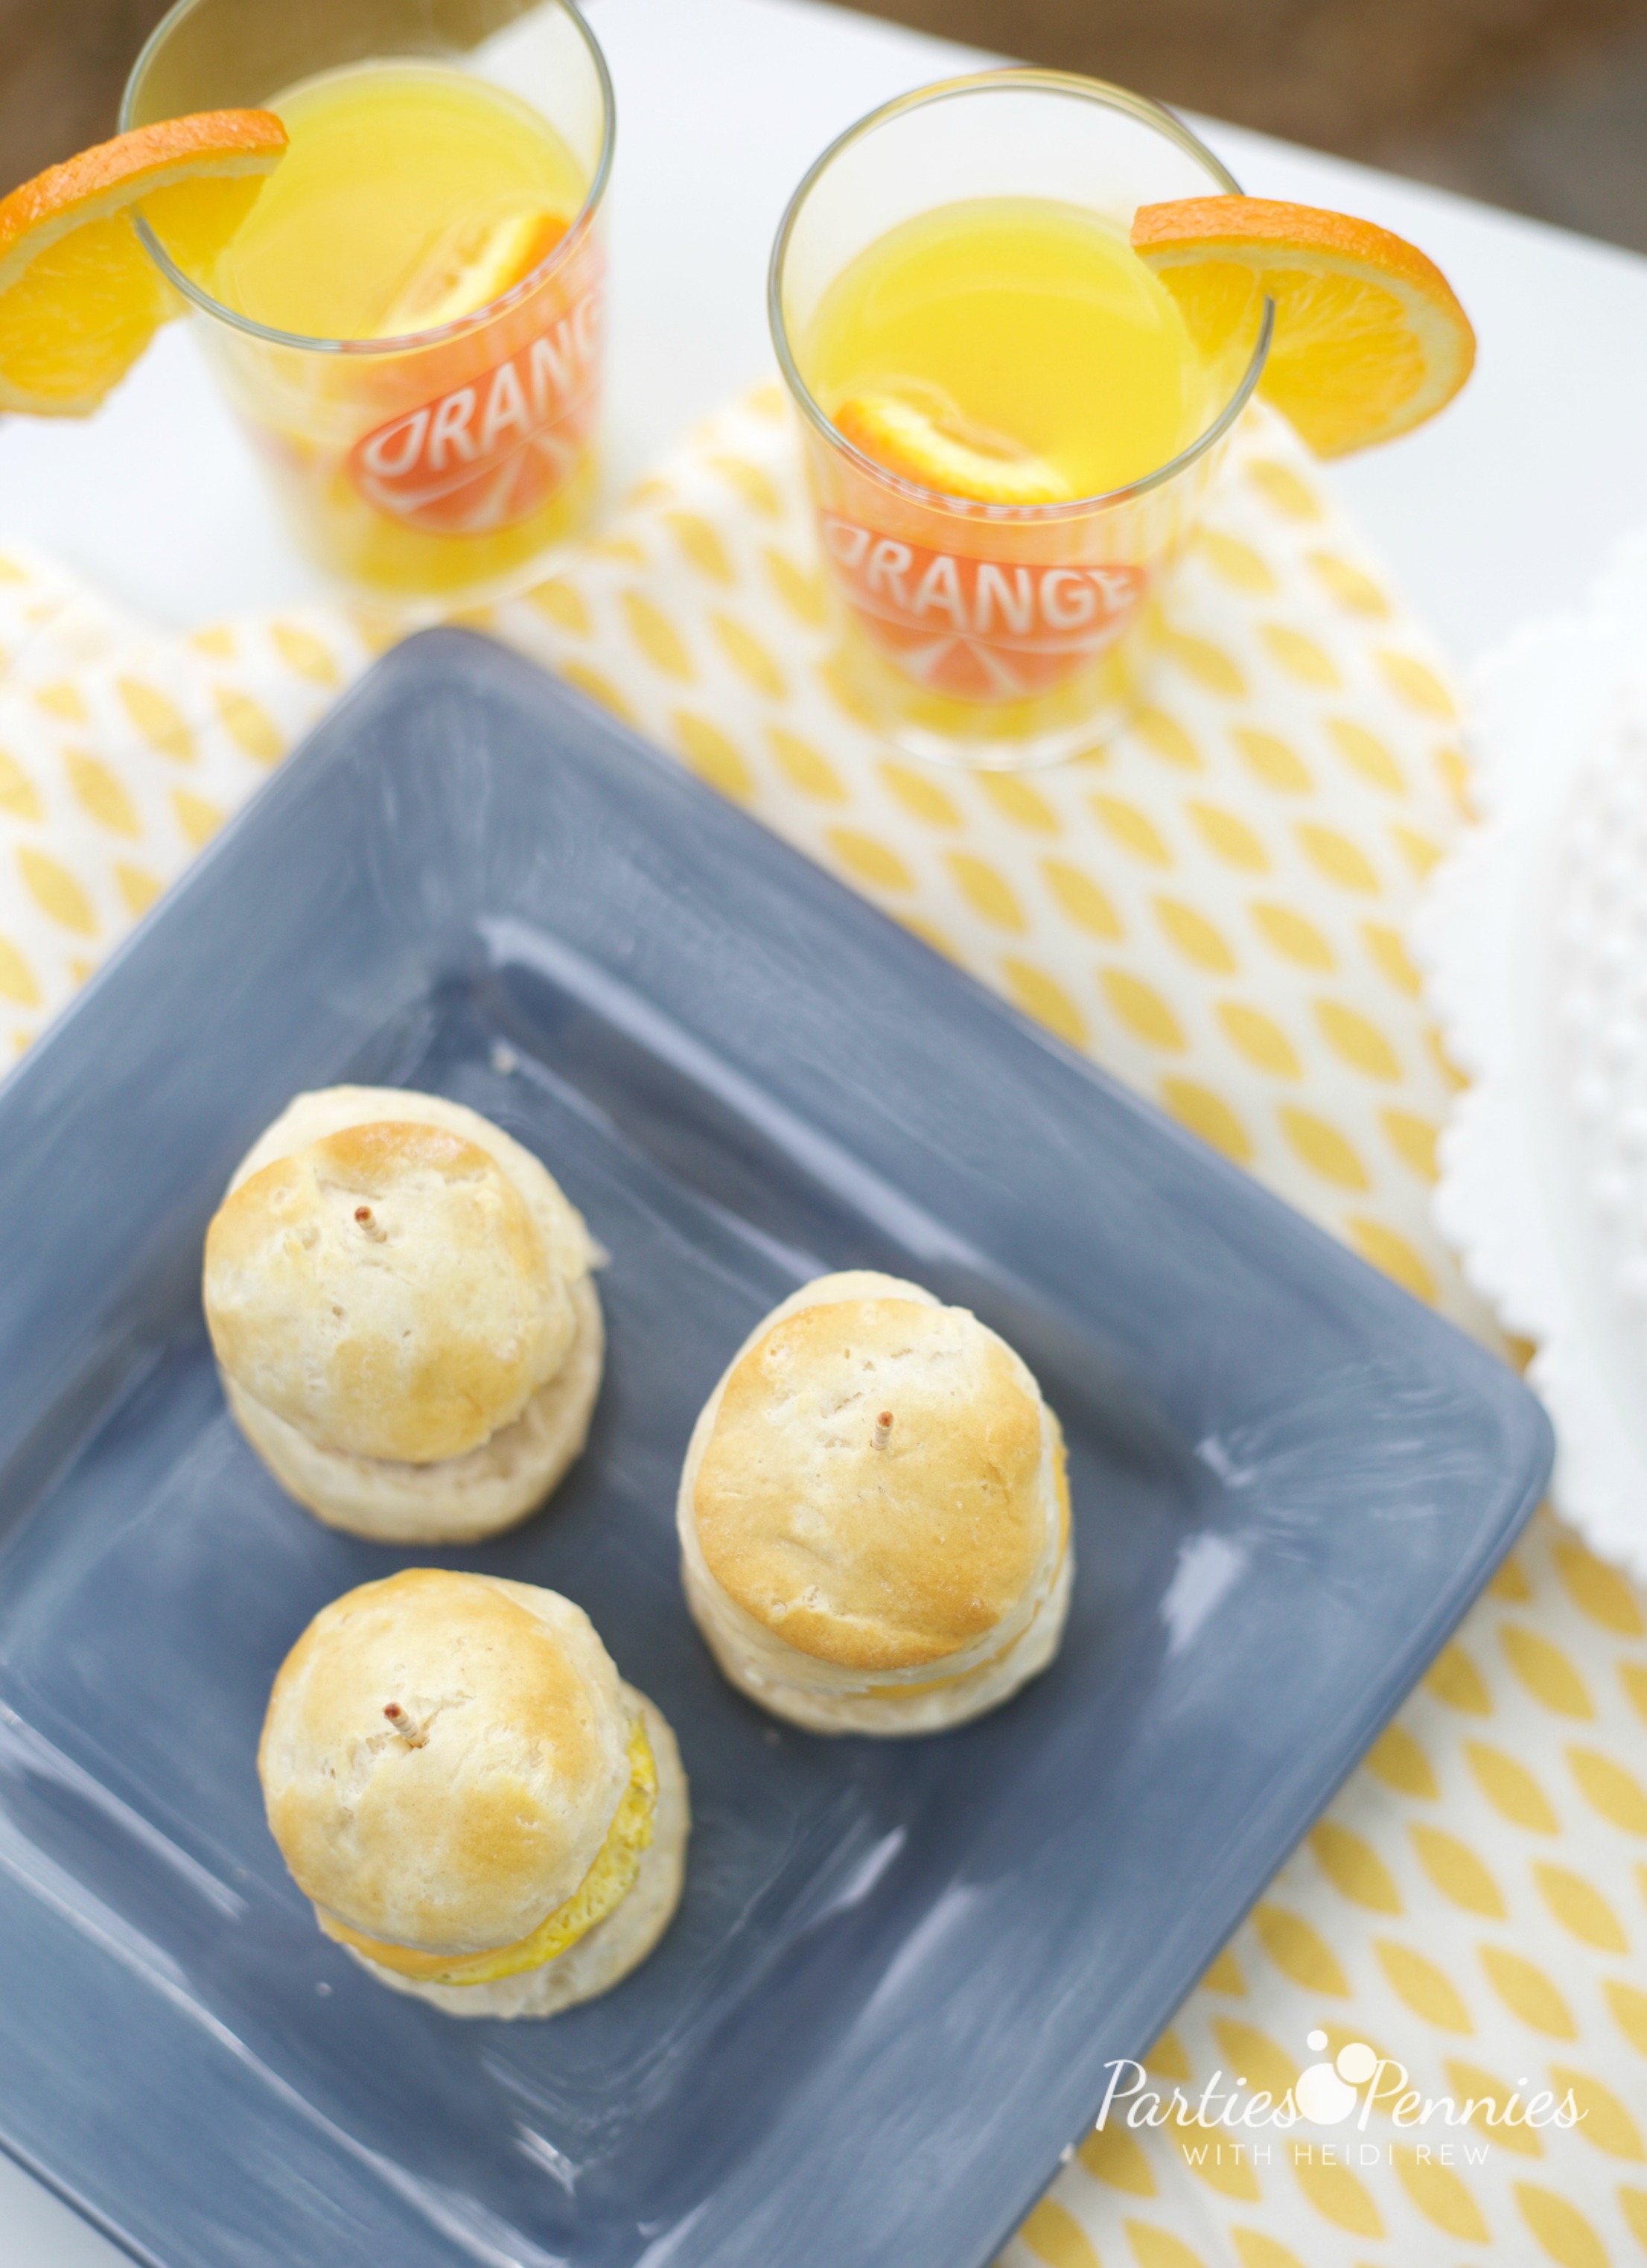 Mini Sausage Egg Cheese Biscuit Appetizer Recipe | PartiesforPennies.com | Recipe, Breakfast, Brunch, Easy Appetizer